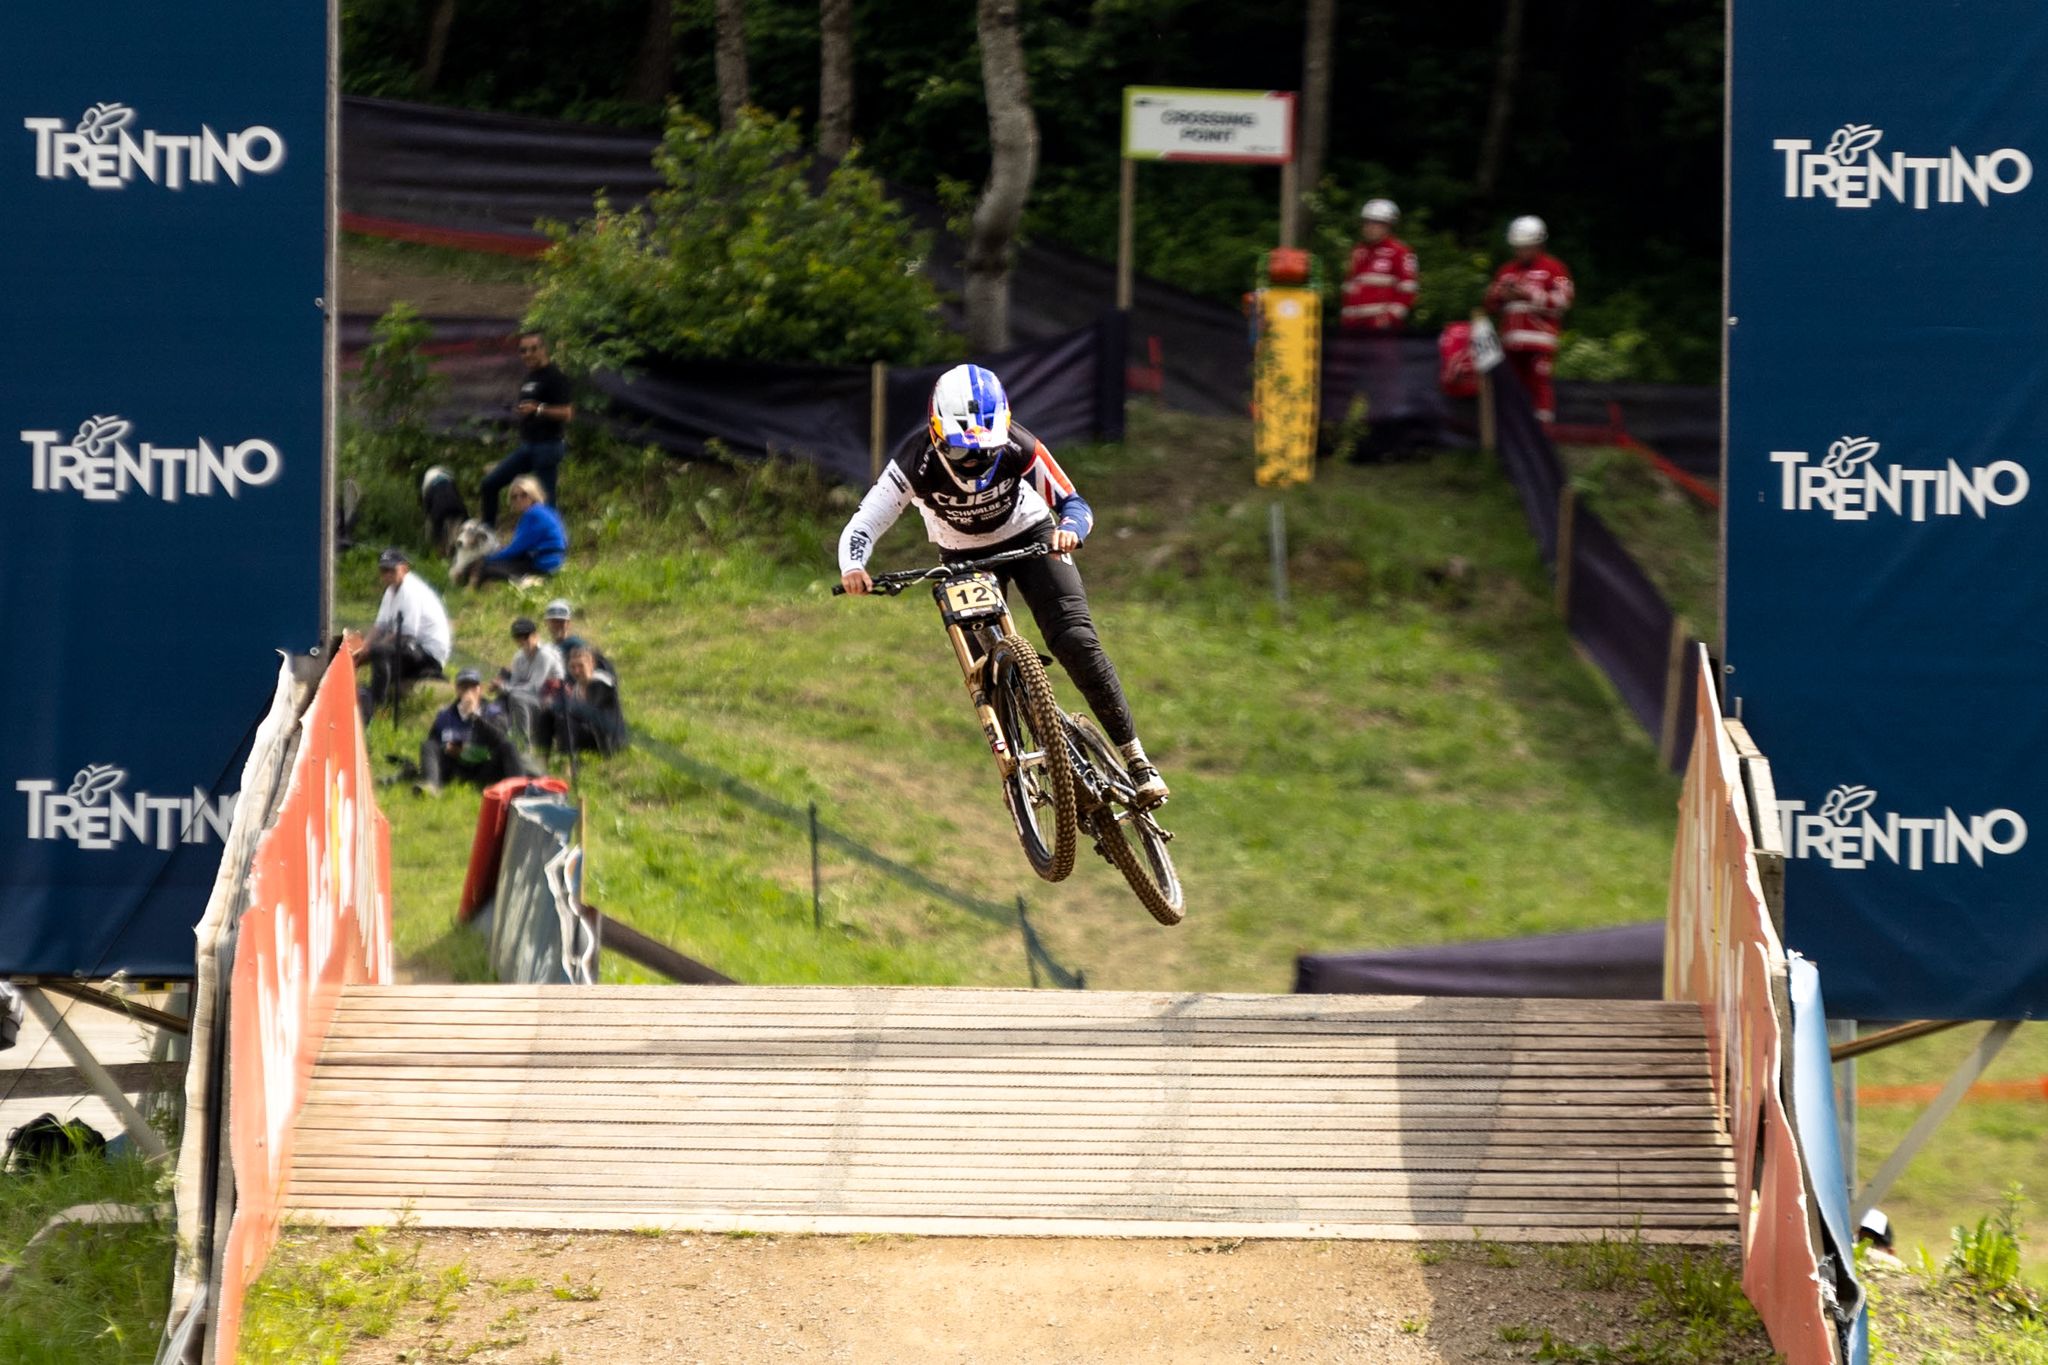 VAL DI SOLE UCI DOWNHILL WORLD CUP PRODUCES TRADEMARK EXCITEMENT IN OPENING ROUNDS, AS OVERALL LEADERS BRUNI AND HÖLL FAIL TO HAVE IT ALL THEIR OWN WAY